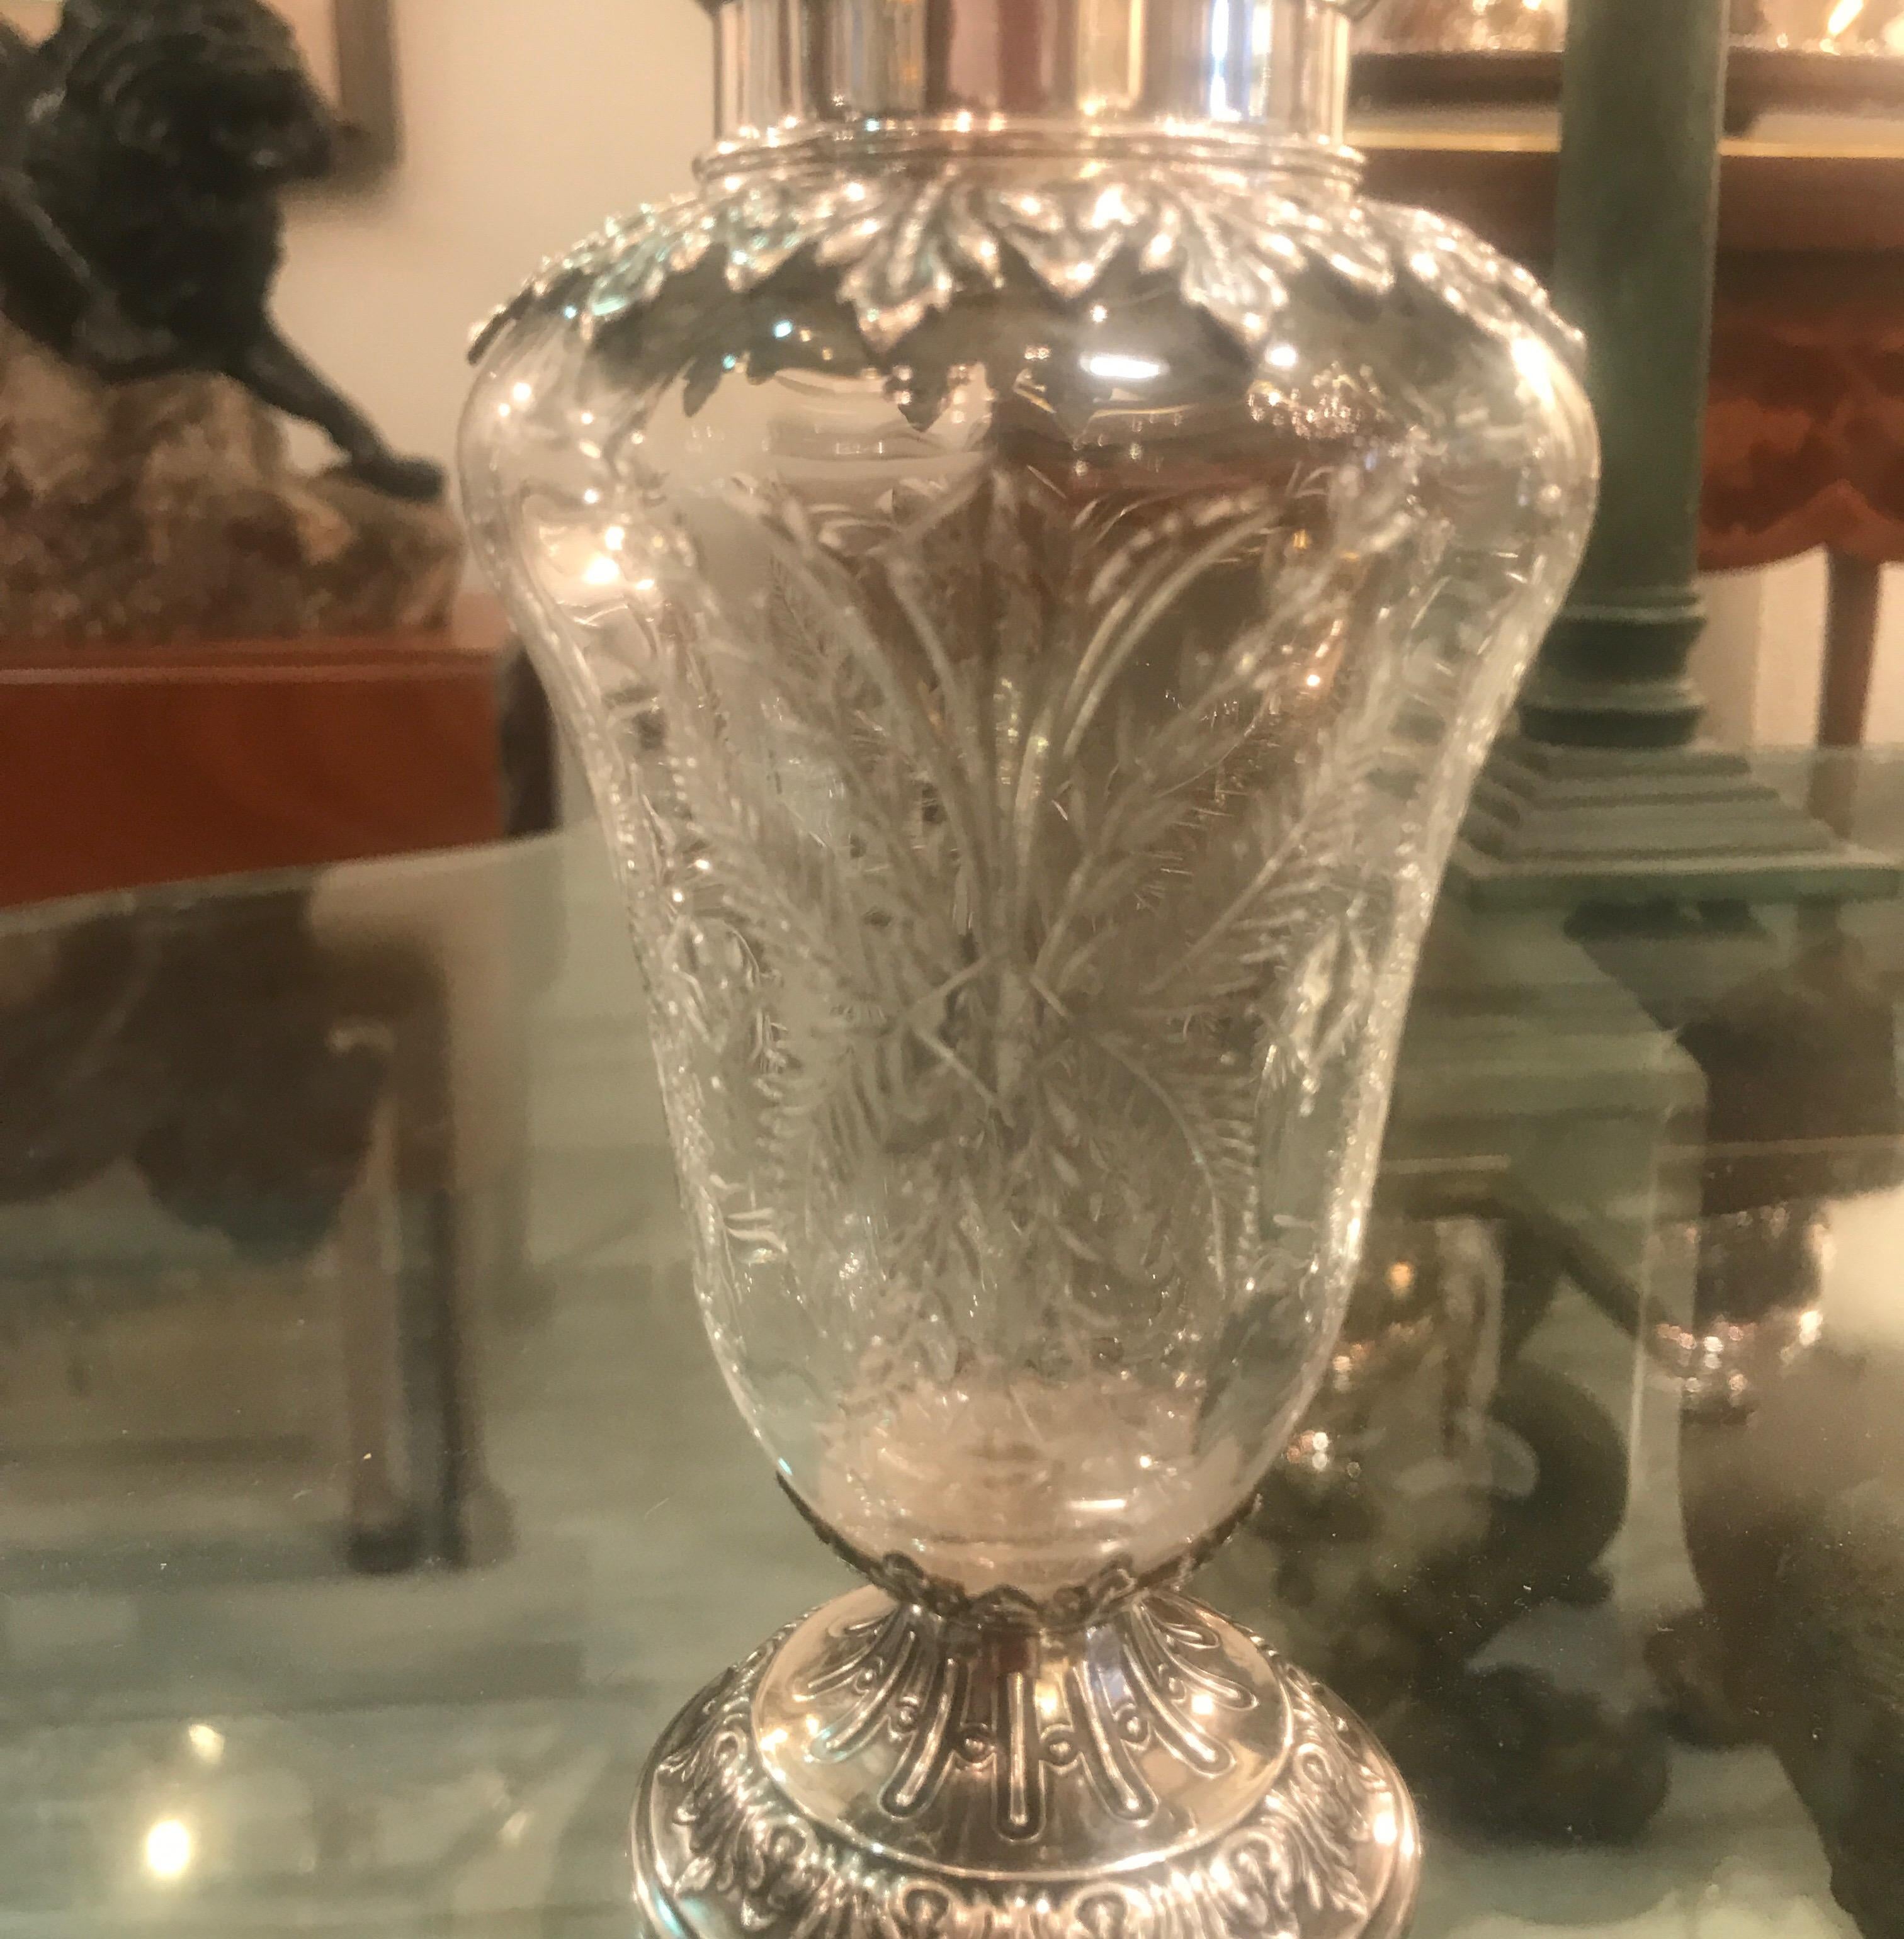 Late 19th Century Pairpoint Sterling Silver Muffineer Sugar Shaker, 19th Century